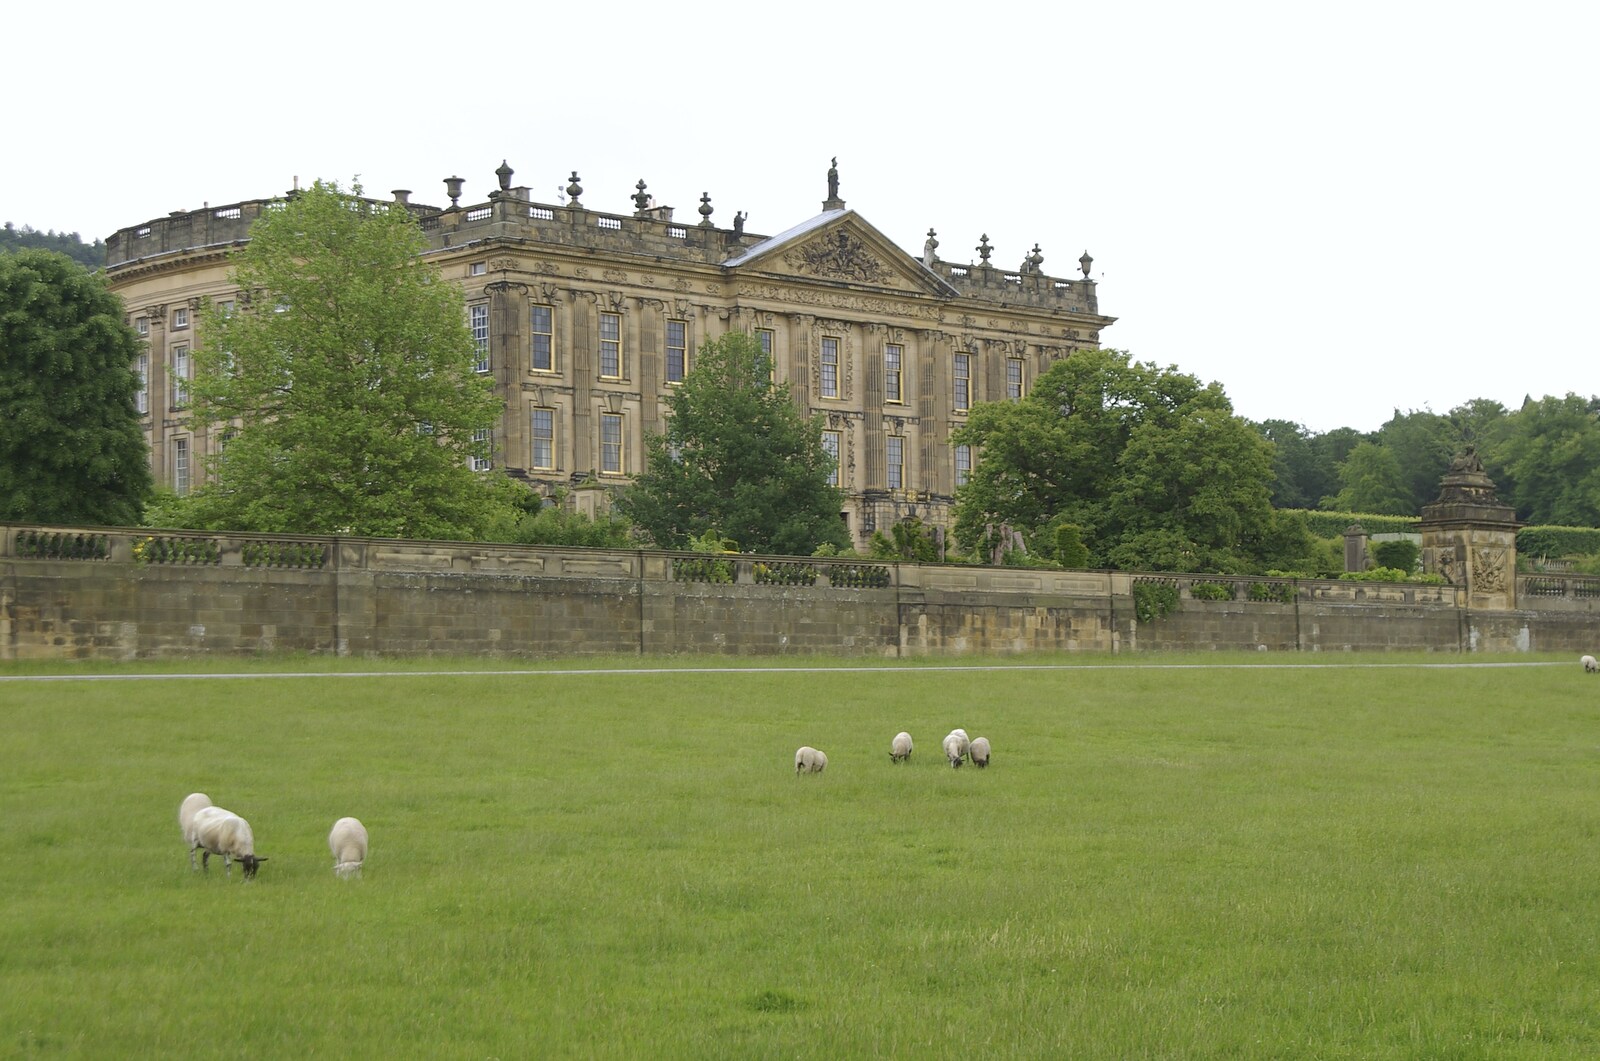 Driving a Racing Car, Three Sisters Racetrack, Wigan, Lancashire - 24th June 2008: Chatsworth House in all its Palladian glory